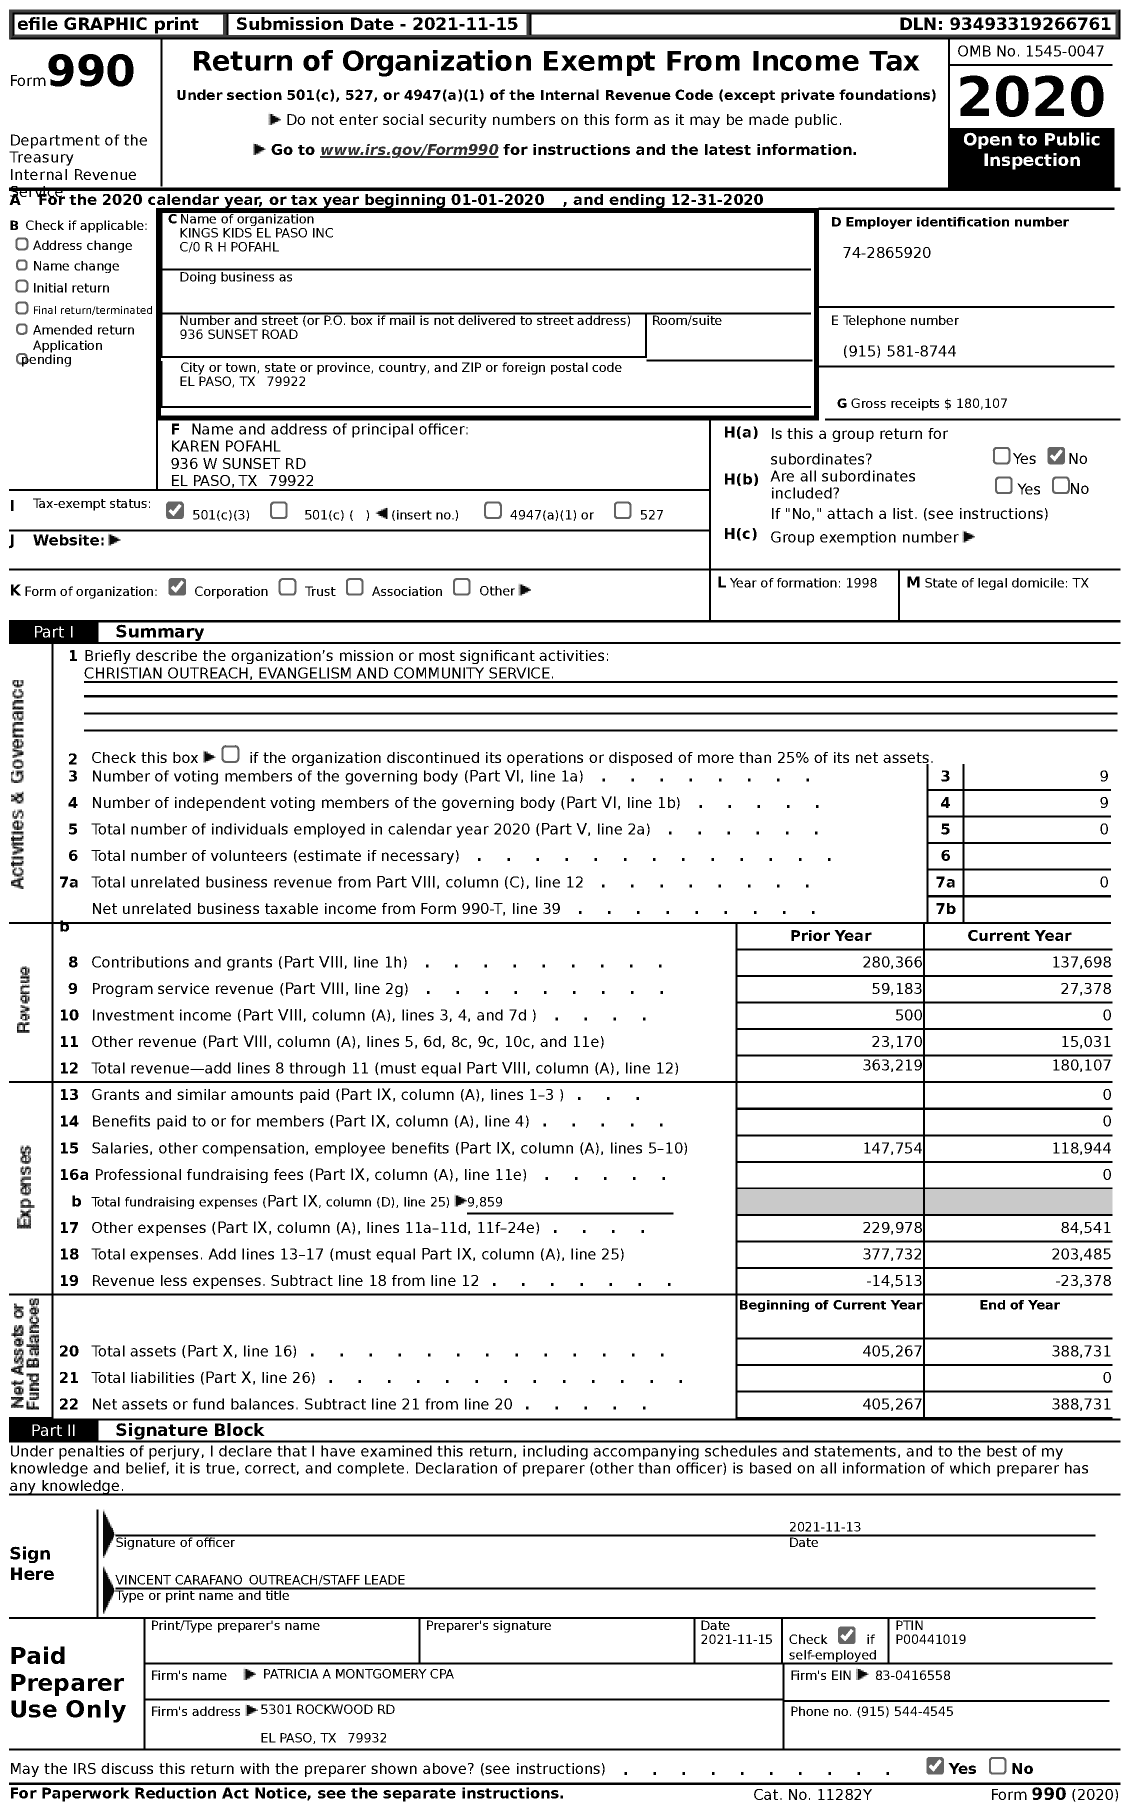 Image of first page of 2020 Form 990 for Kings Kids El Paso C / 0 R H Pofahl